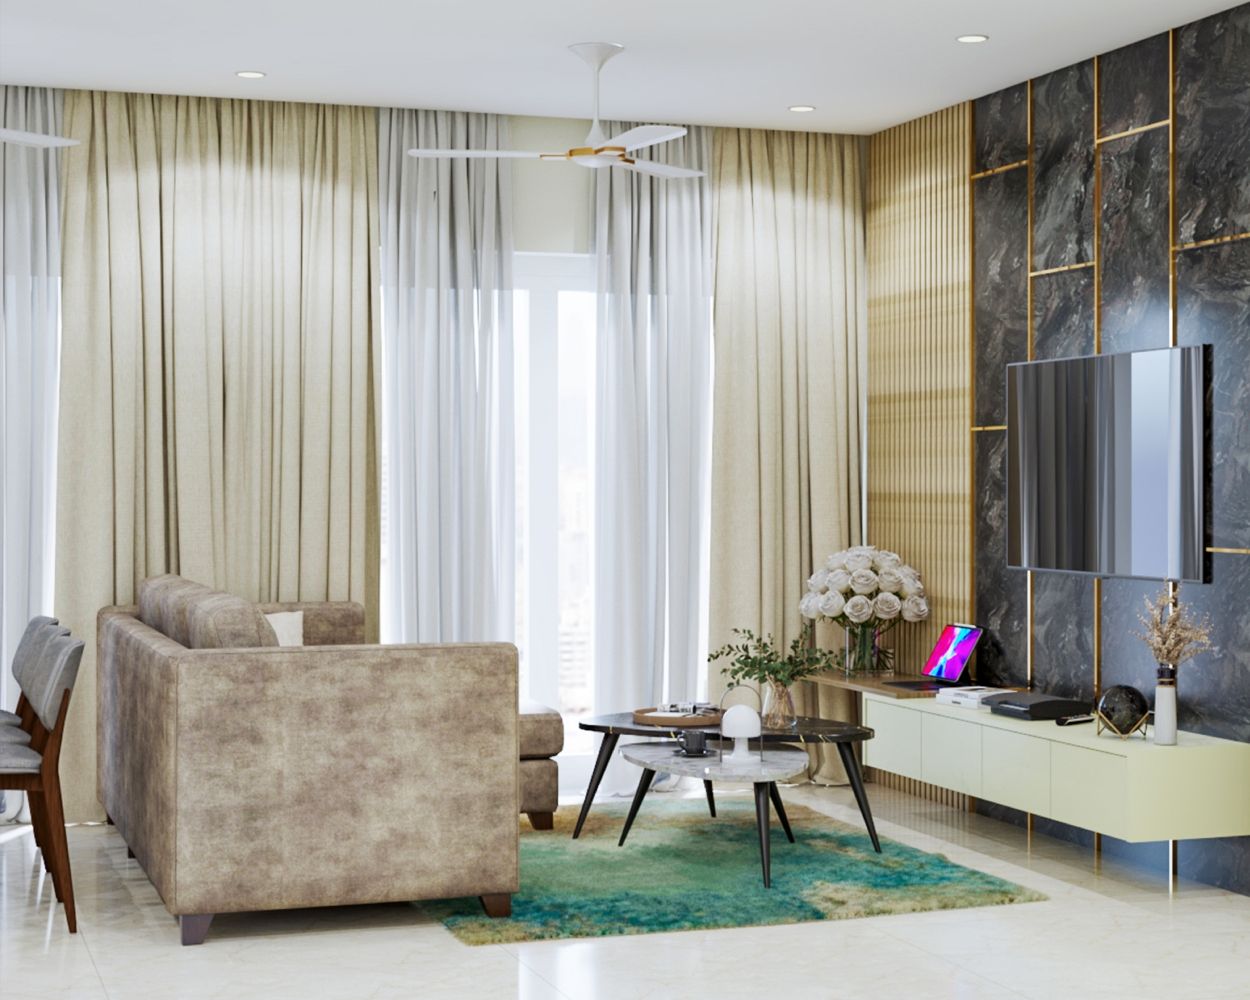 Contemporary Beige Living Room Design With Wall-Mounted White And Black TV Unit And Gold Panelling